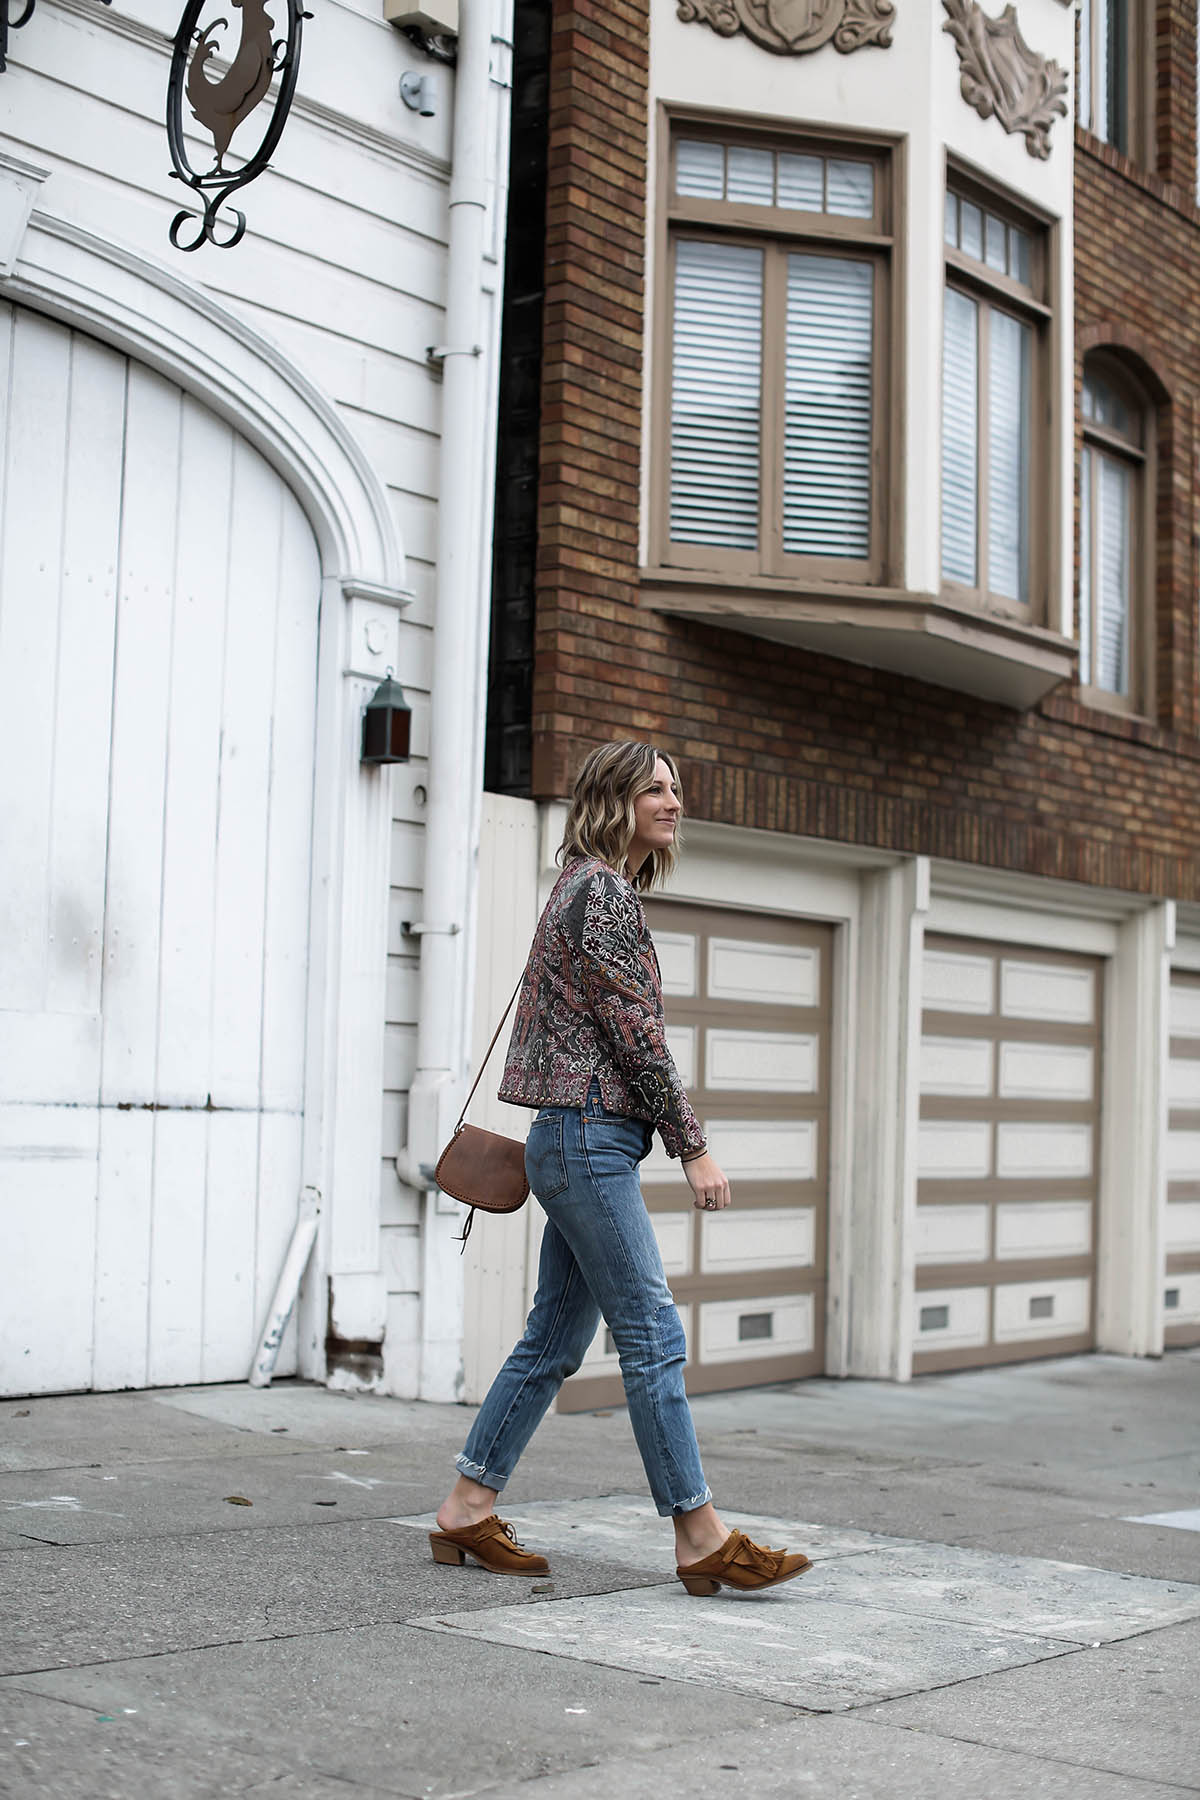 anthropologie statement jacket and jeans outfit